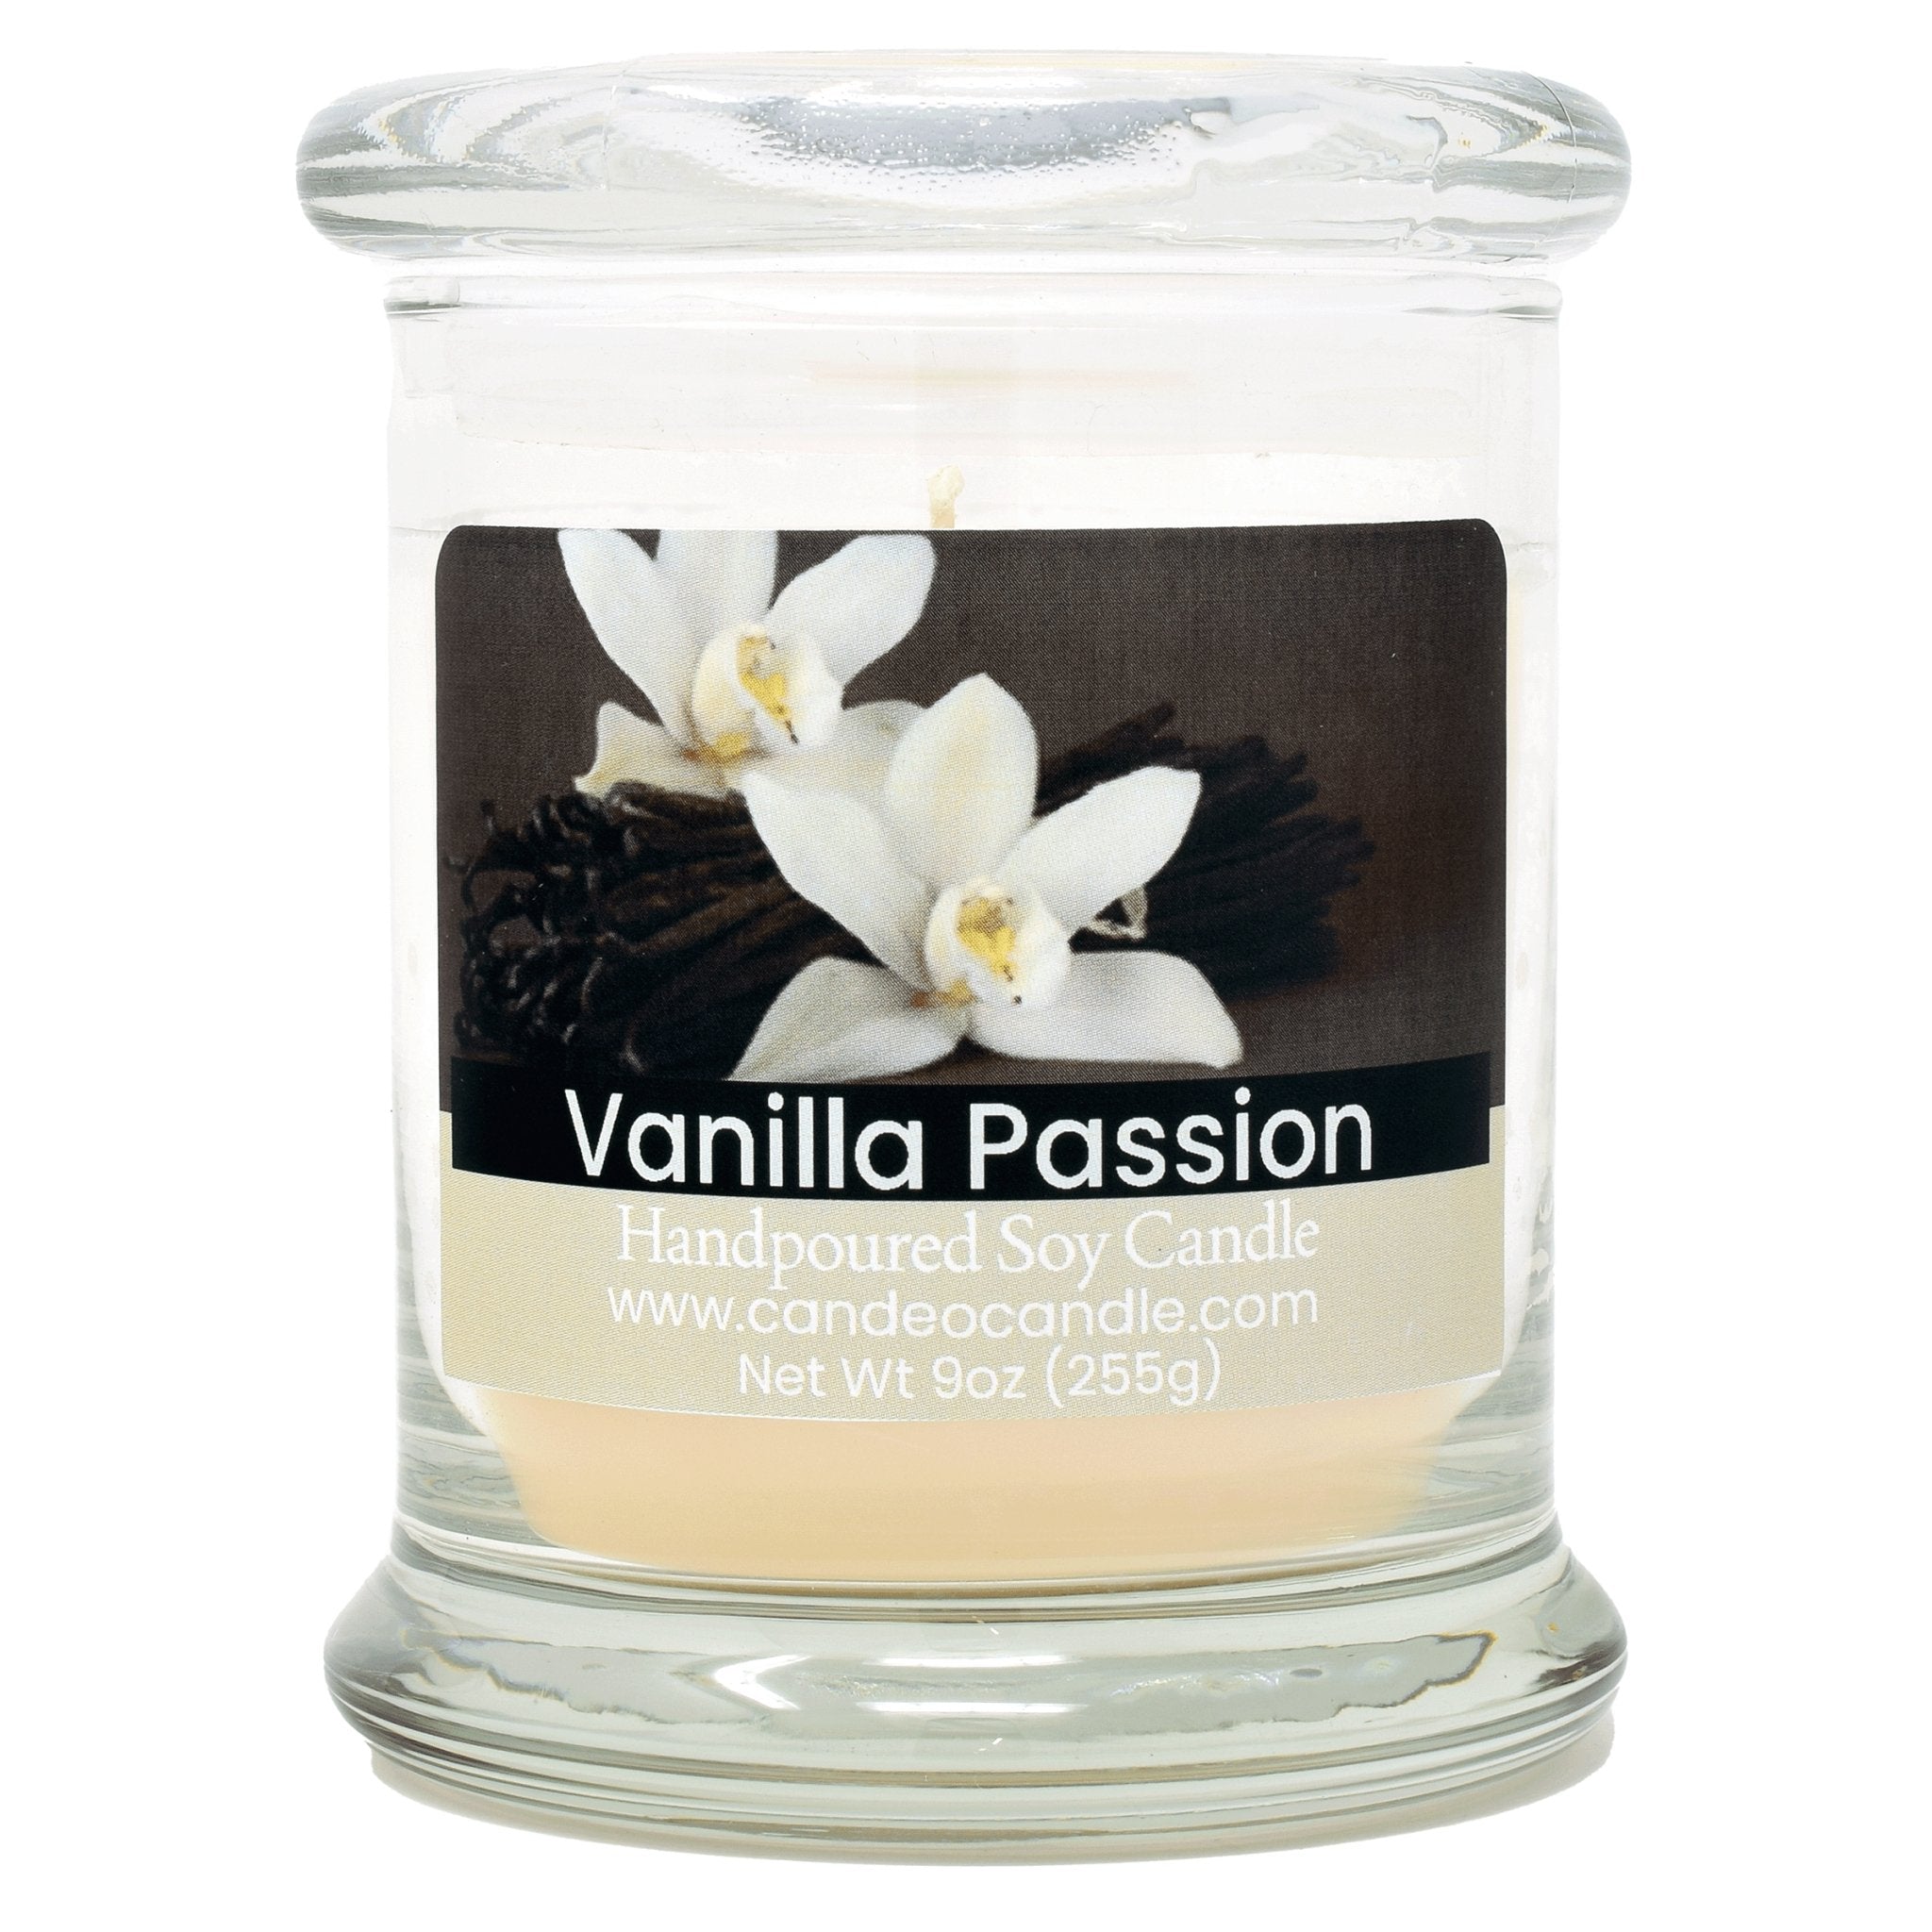 Vanilla Passion, 9oz Soy Candle Jar - Candeo Candle